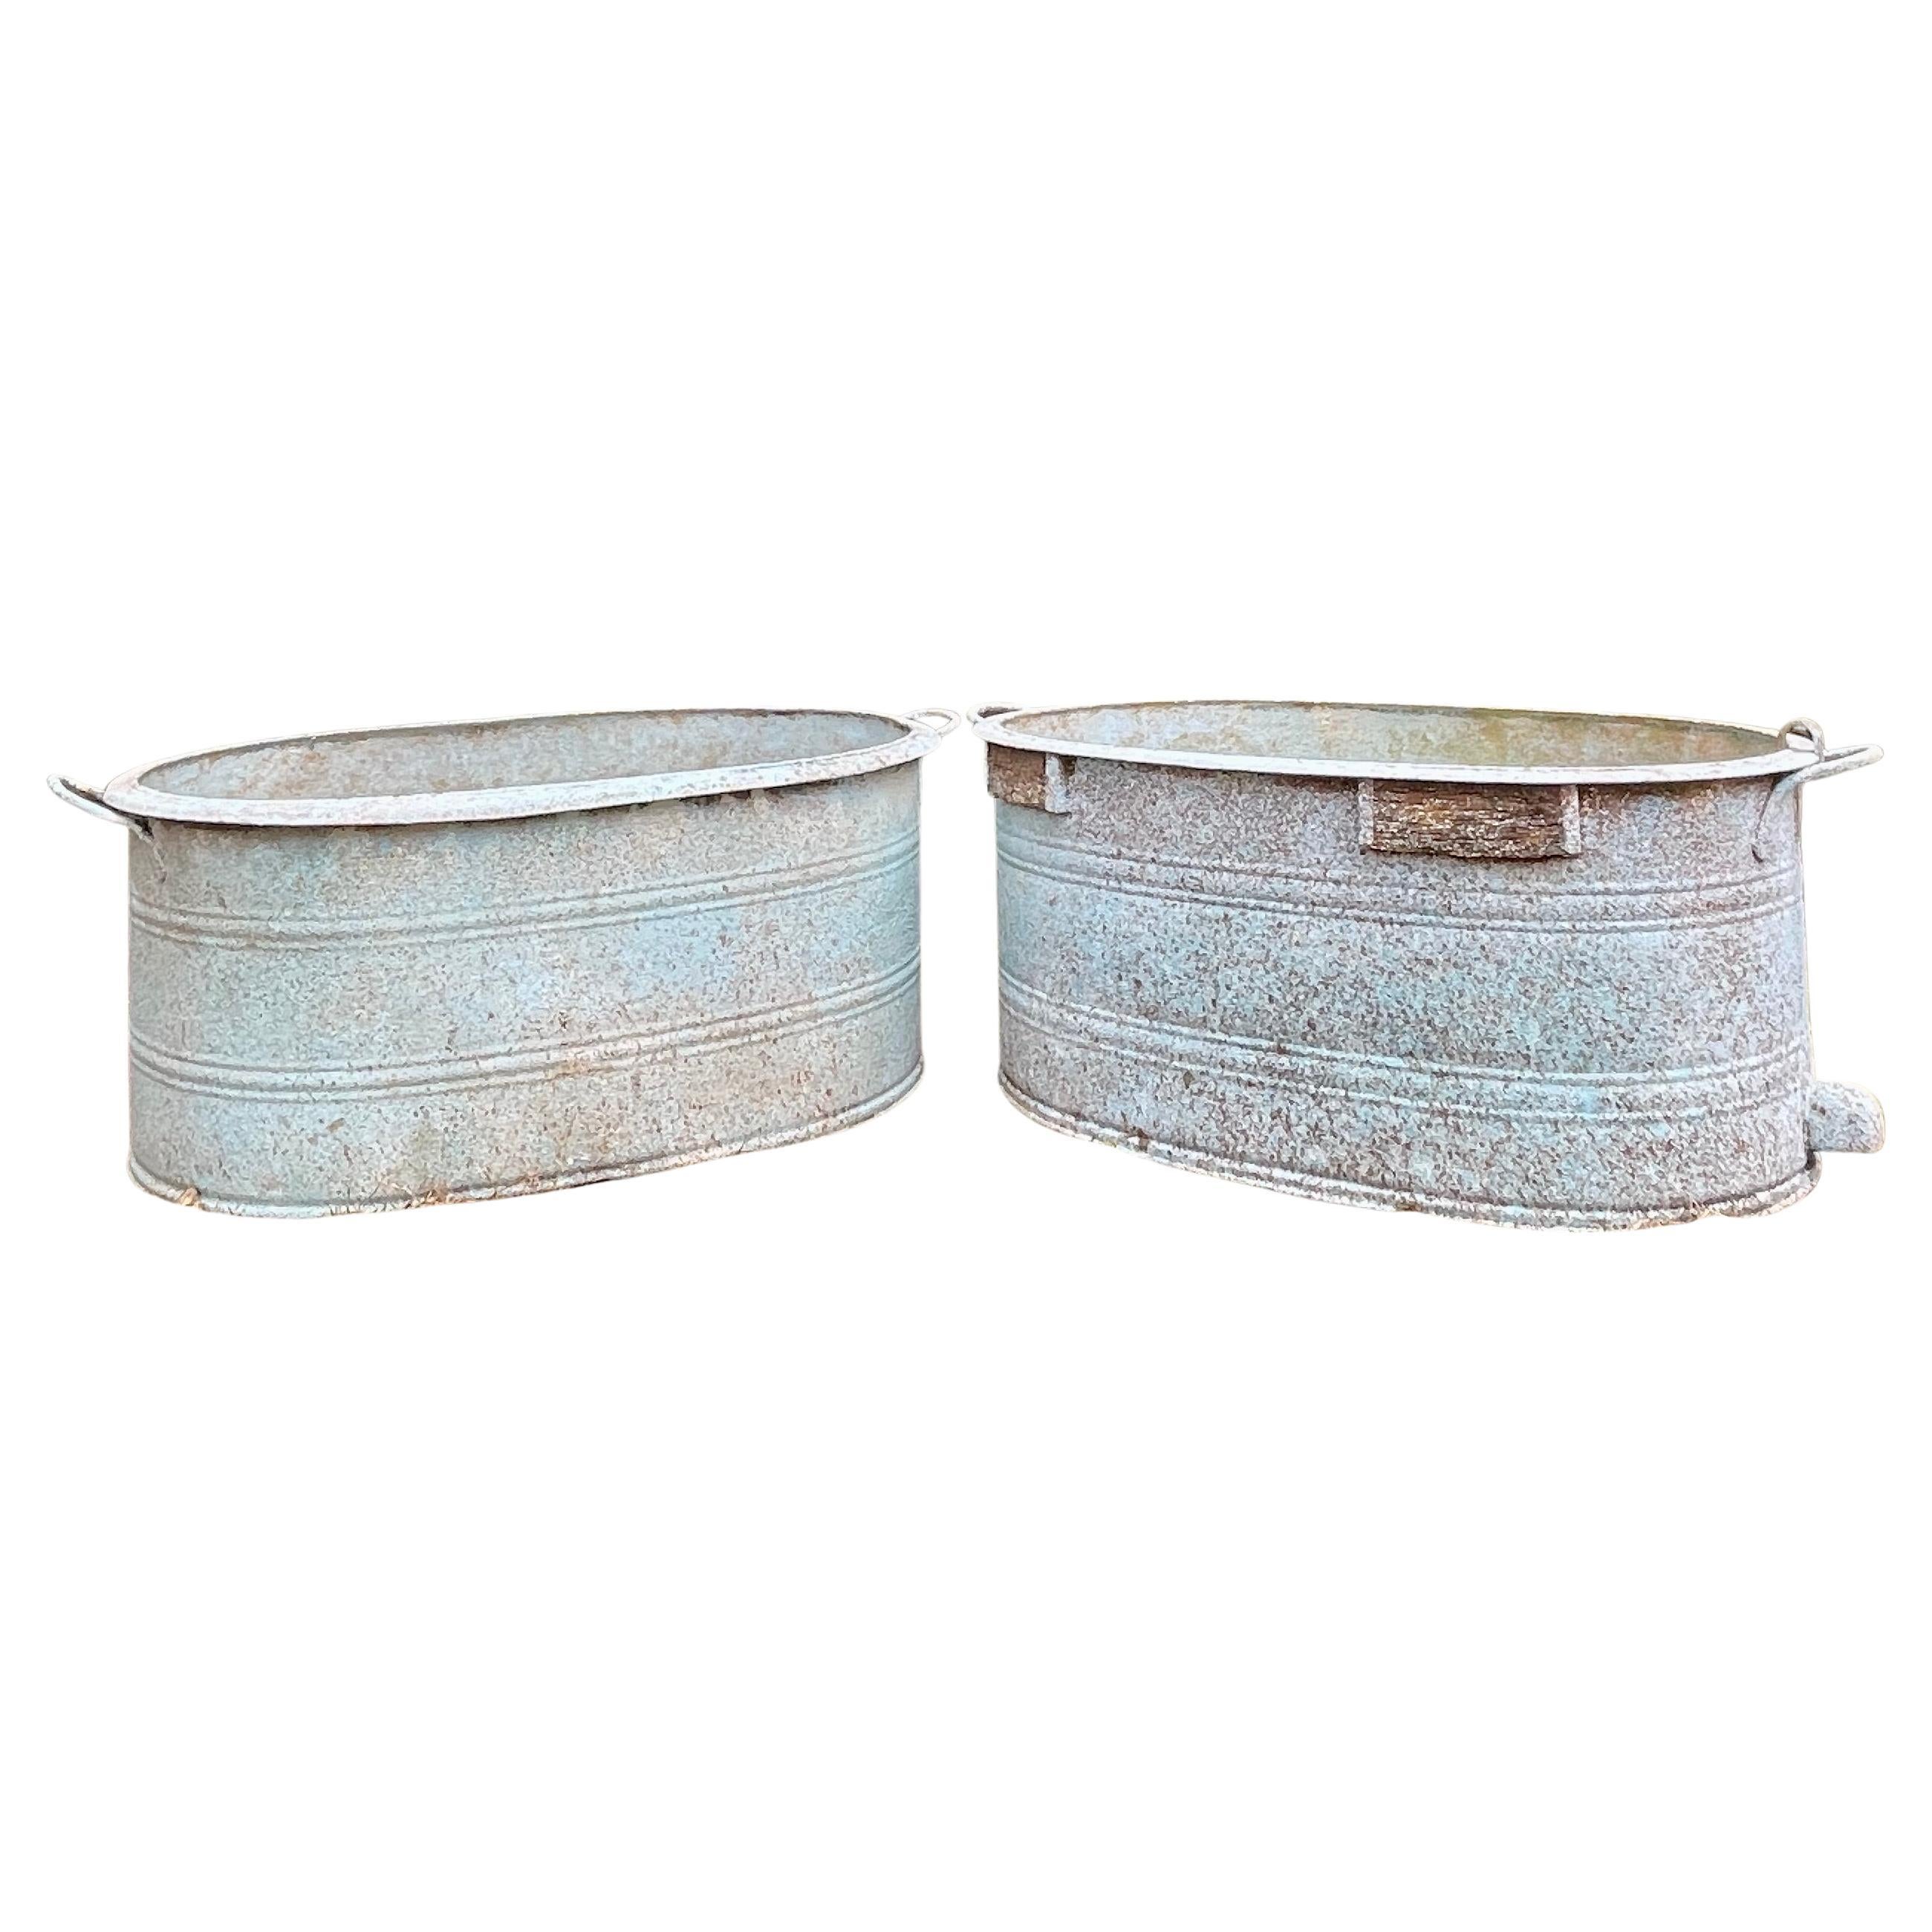 Near-Pair of Large German Oval Galvanized Planters with Custom Painted Surface